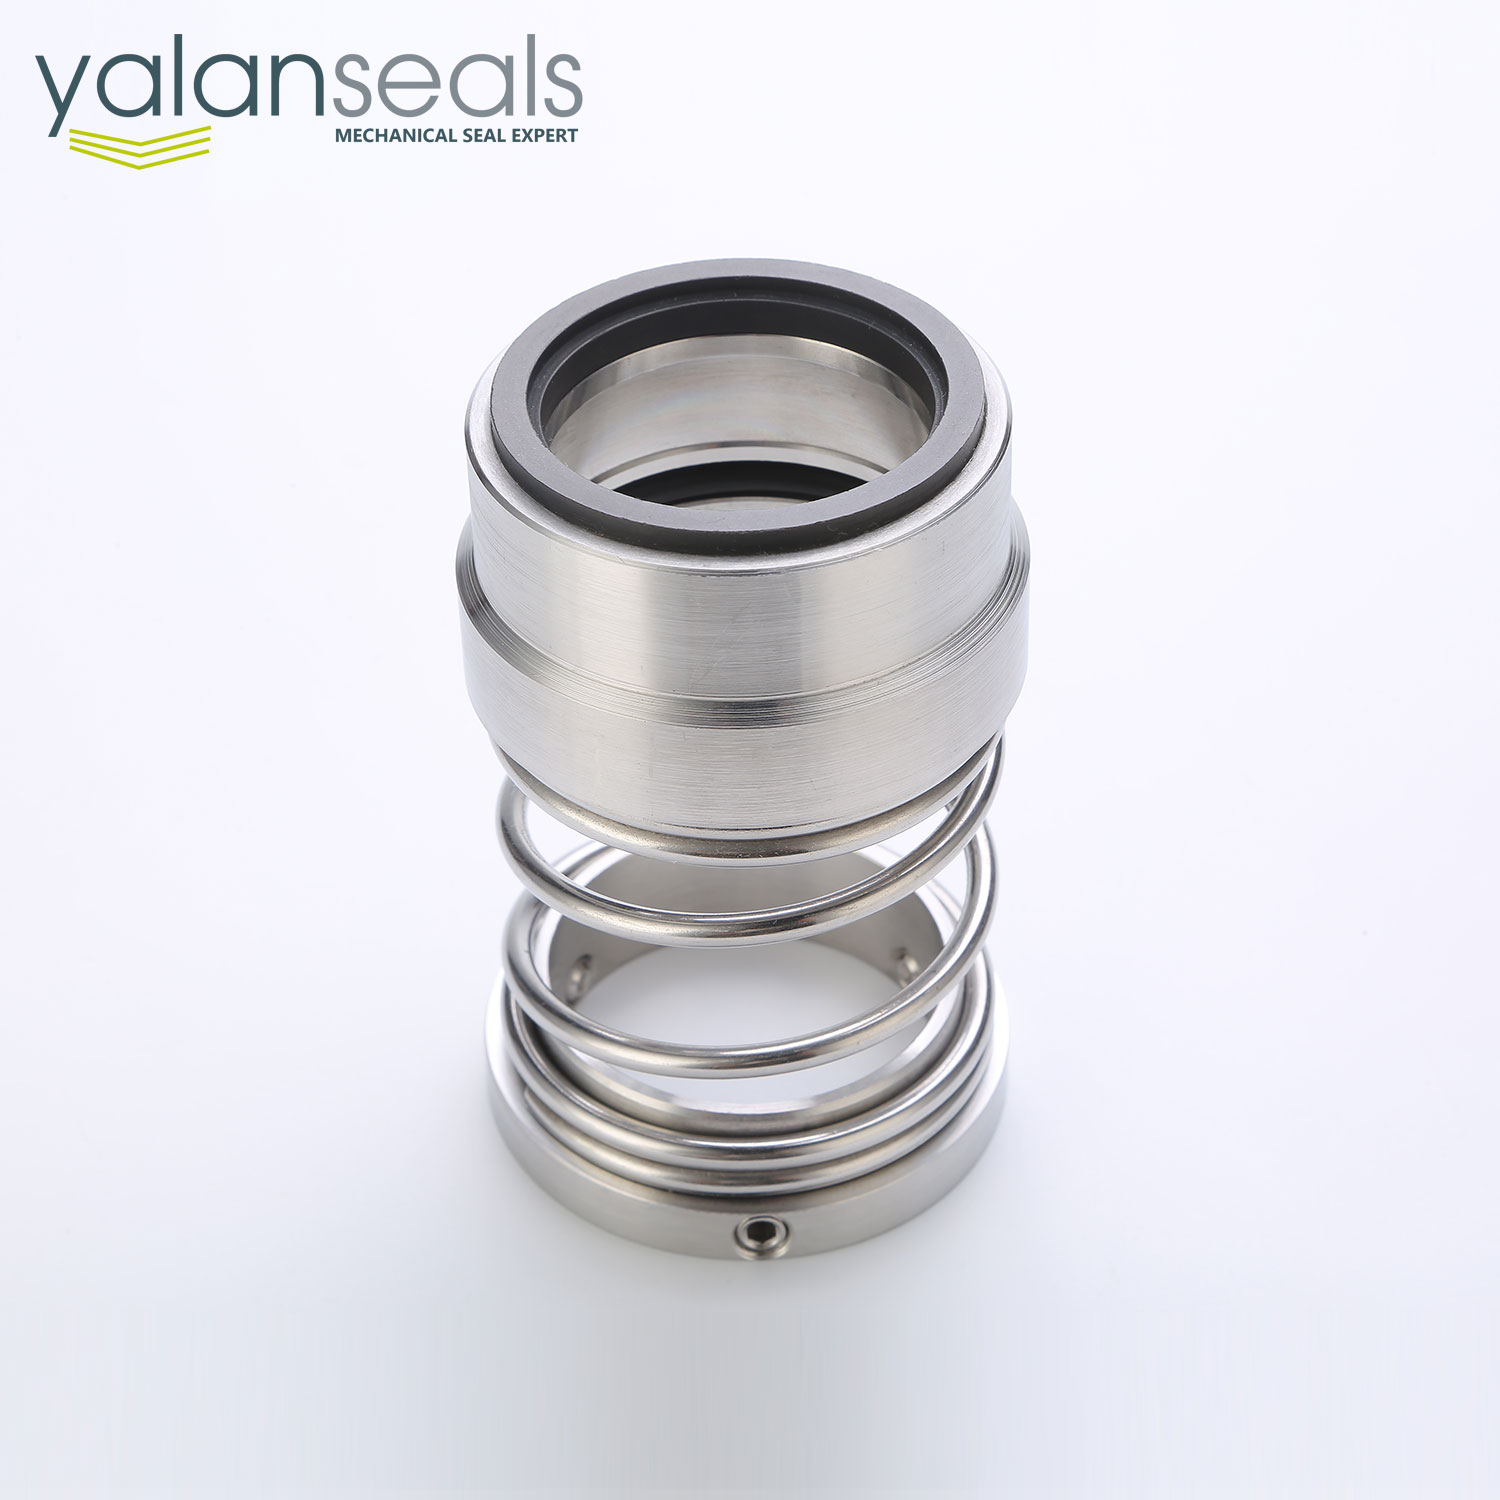 YALAN Type 1523 Mechanical Seals for Industrial Pumps